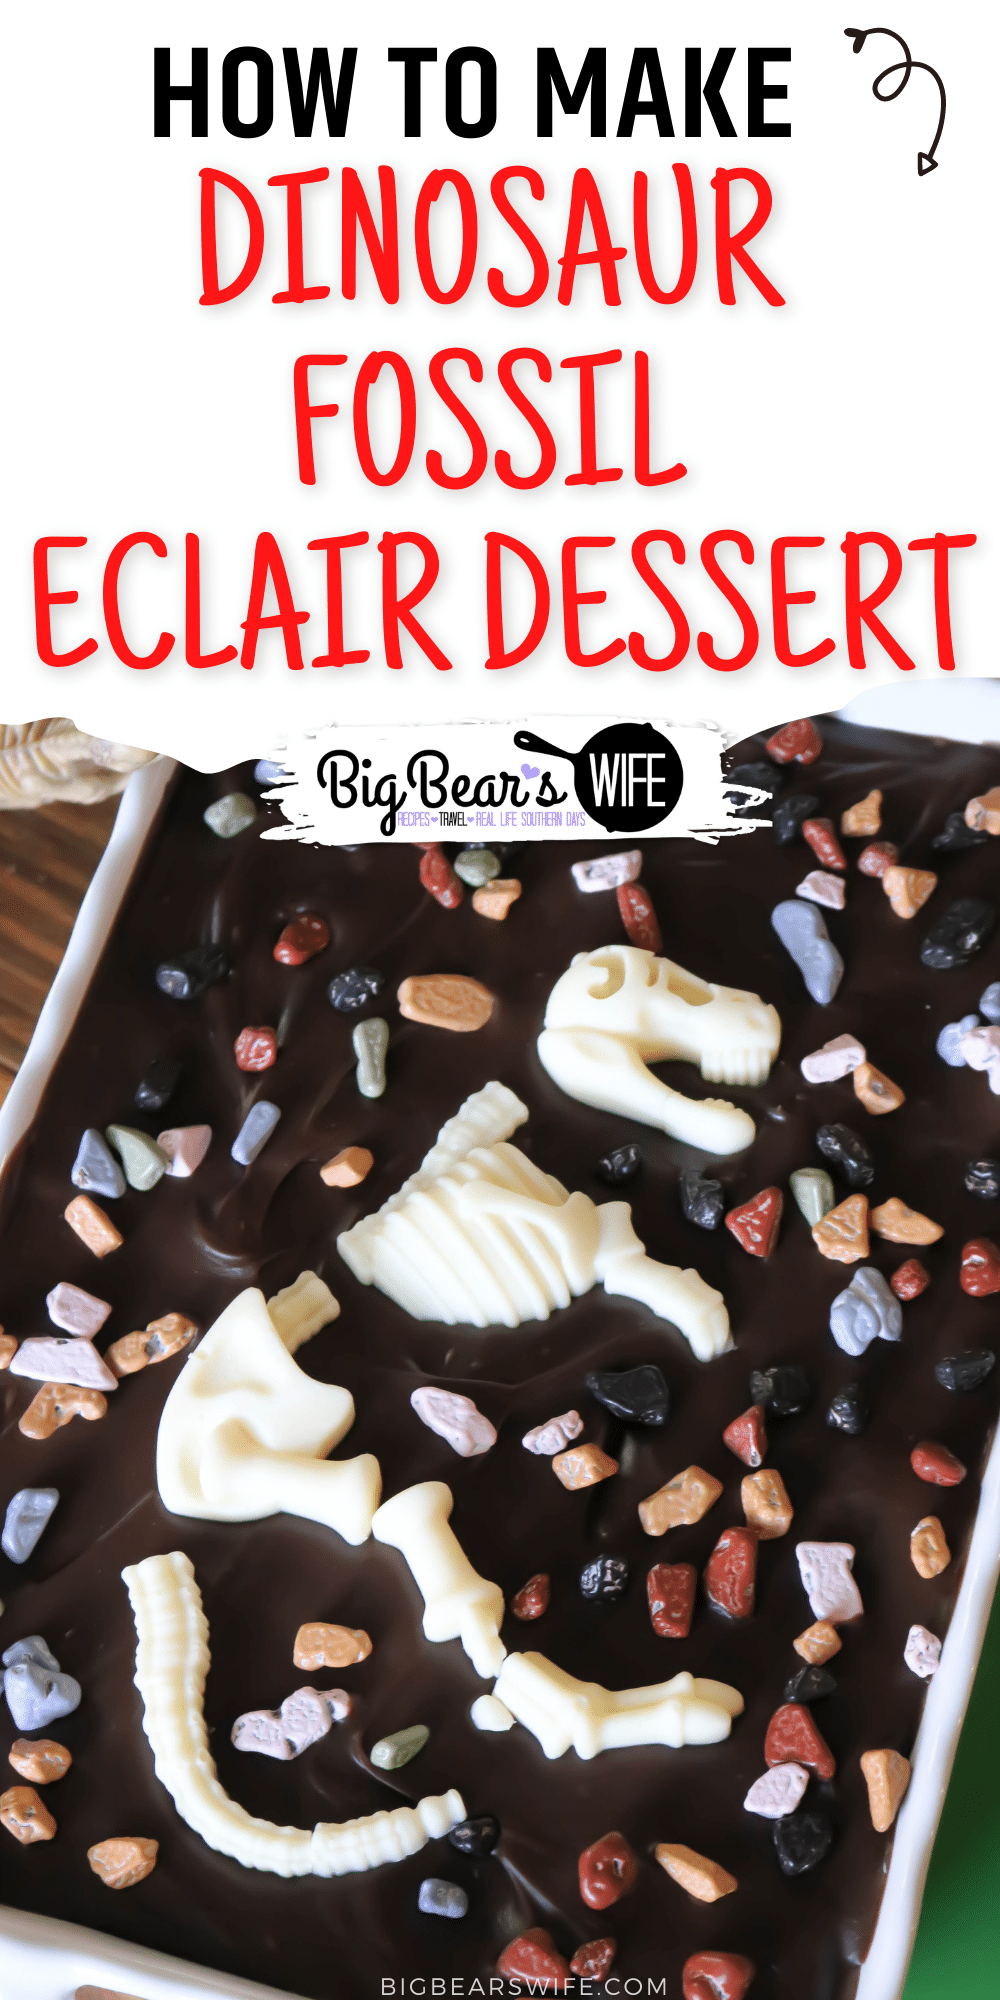 This fun dessert is prefect for a dinosaur birthday or just a cute dessert for anyone that loves dinosaurs! You'll love how easy this Dinosaur Fossil Eclair Dessert is to make! via @bigbearswife